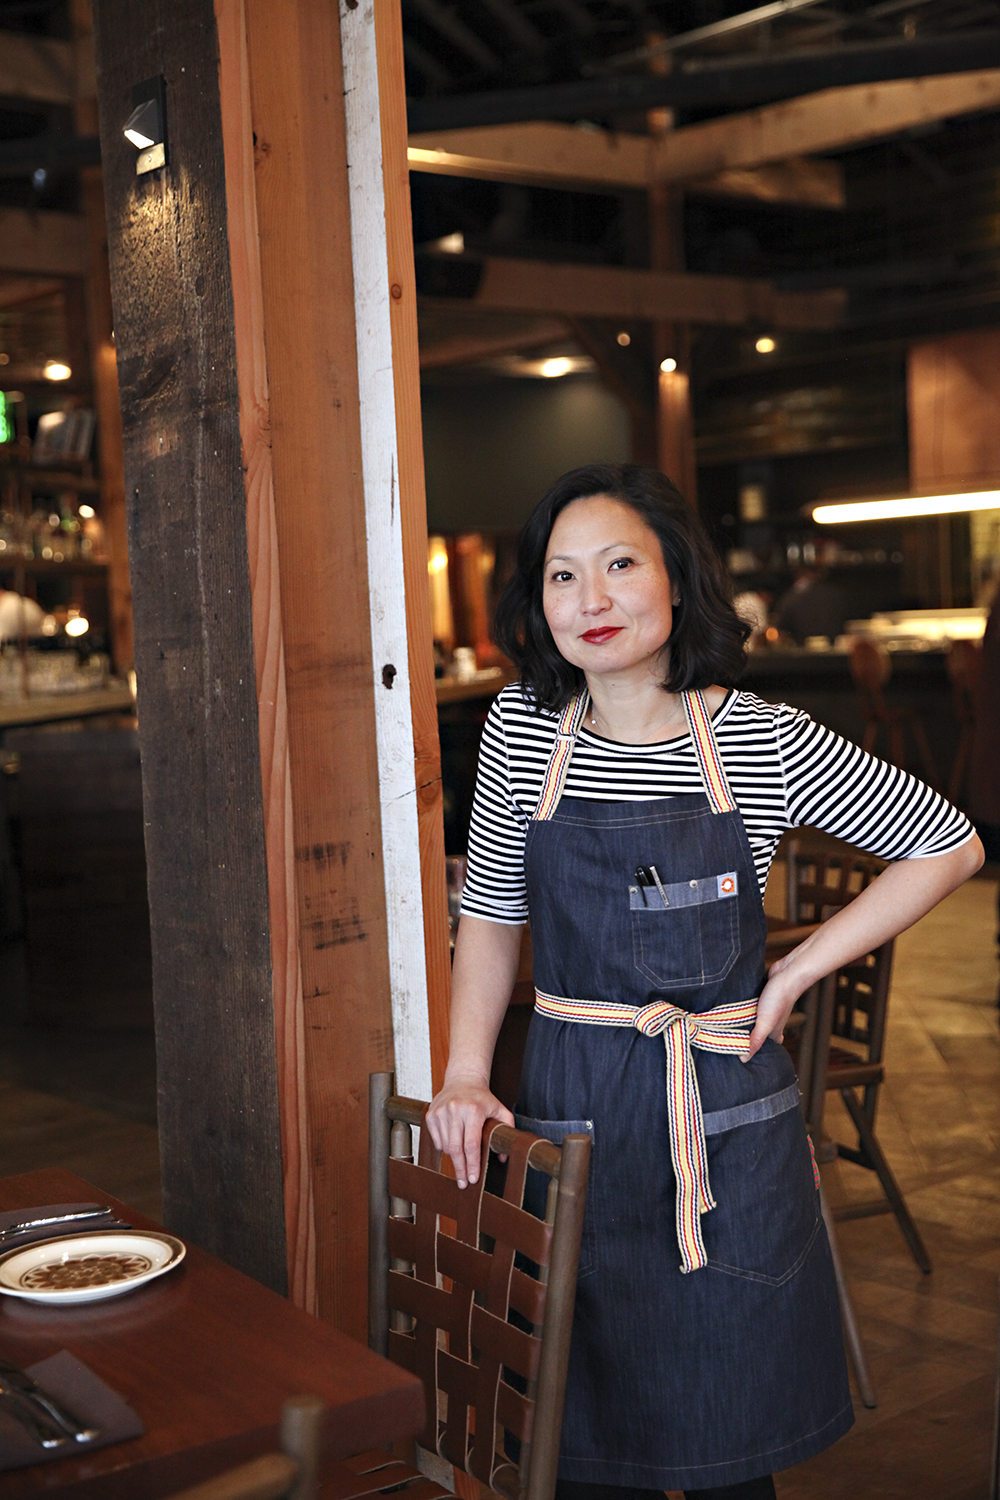 Ann Kim wearing a black and white striped shirt and blue apron leans on a chair, one hand on her hip inside the dining room at Young Joni